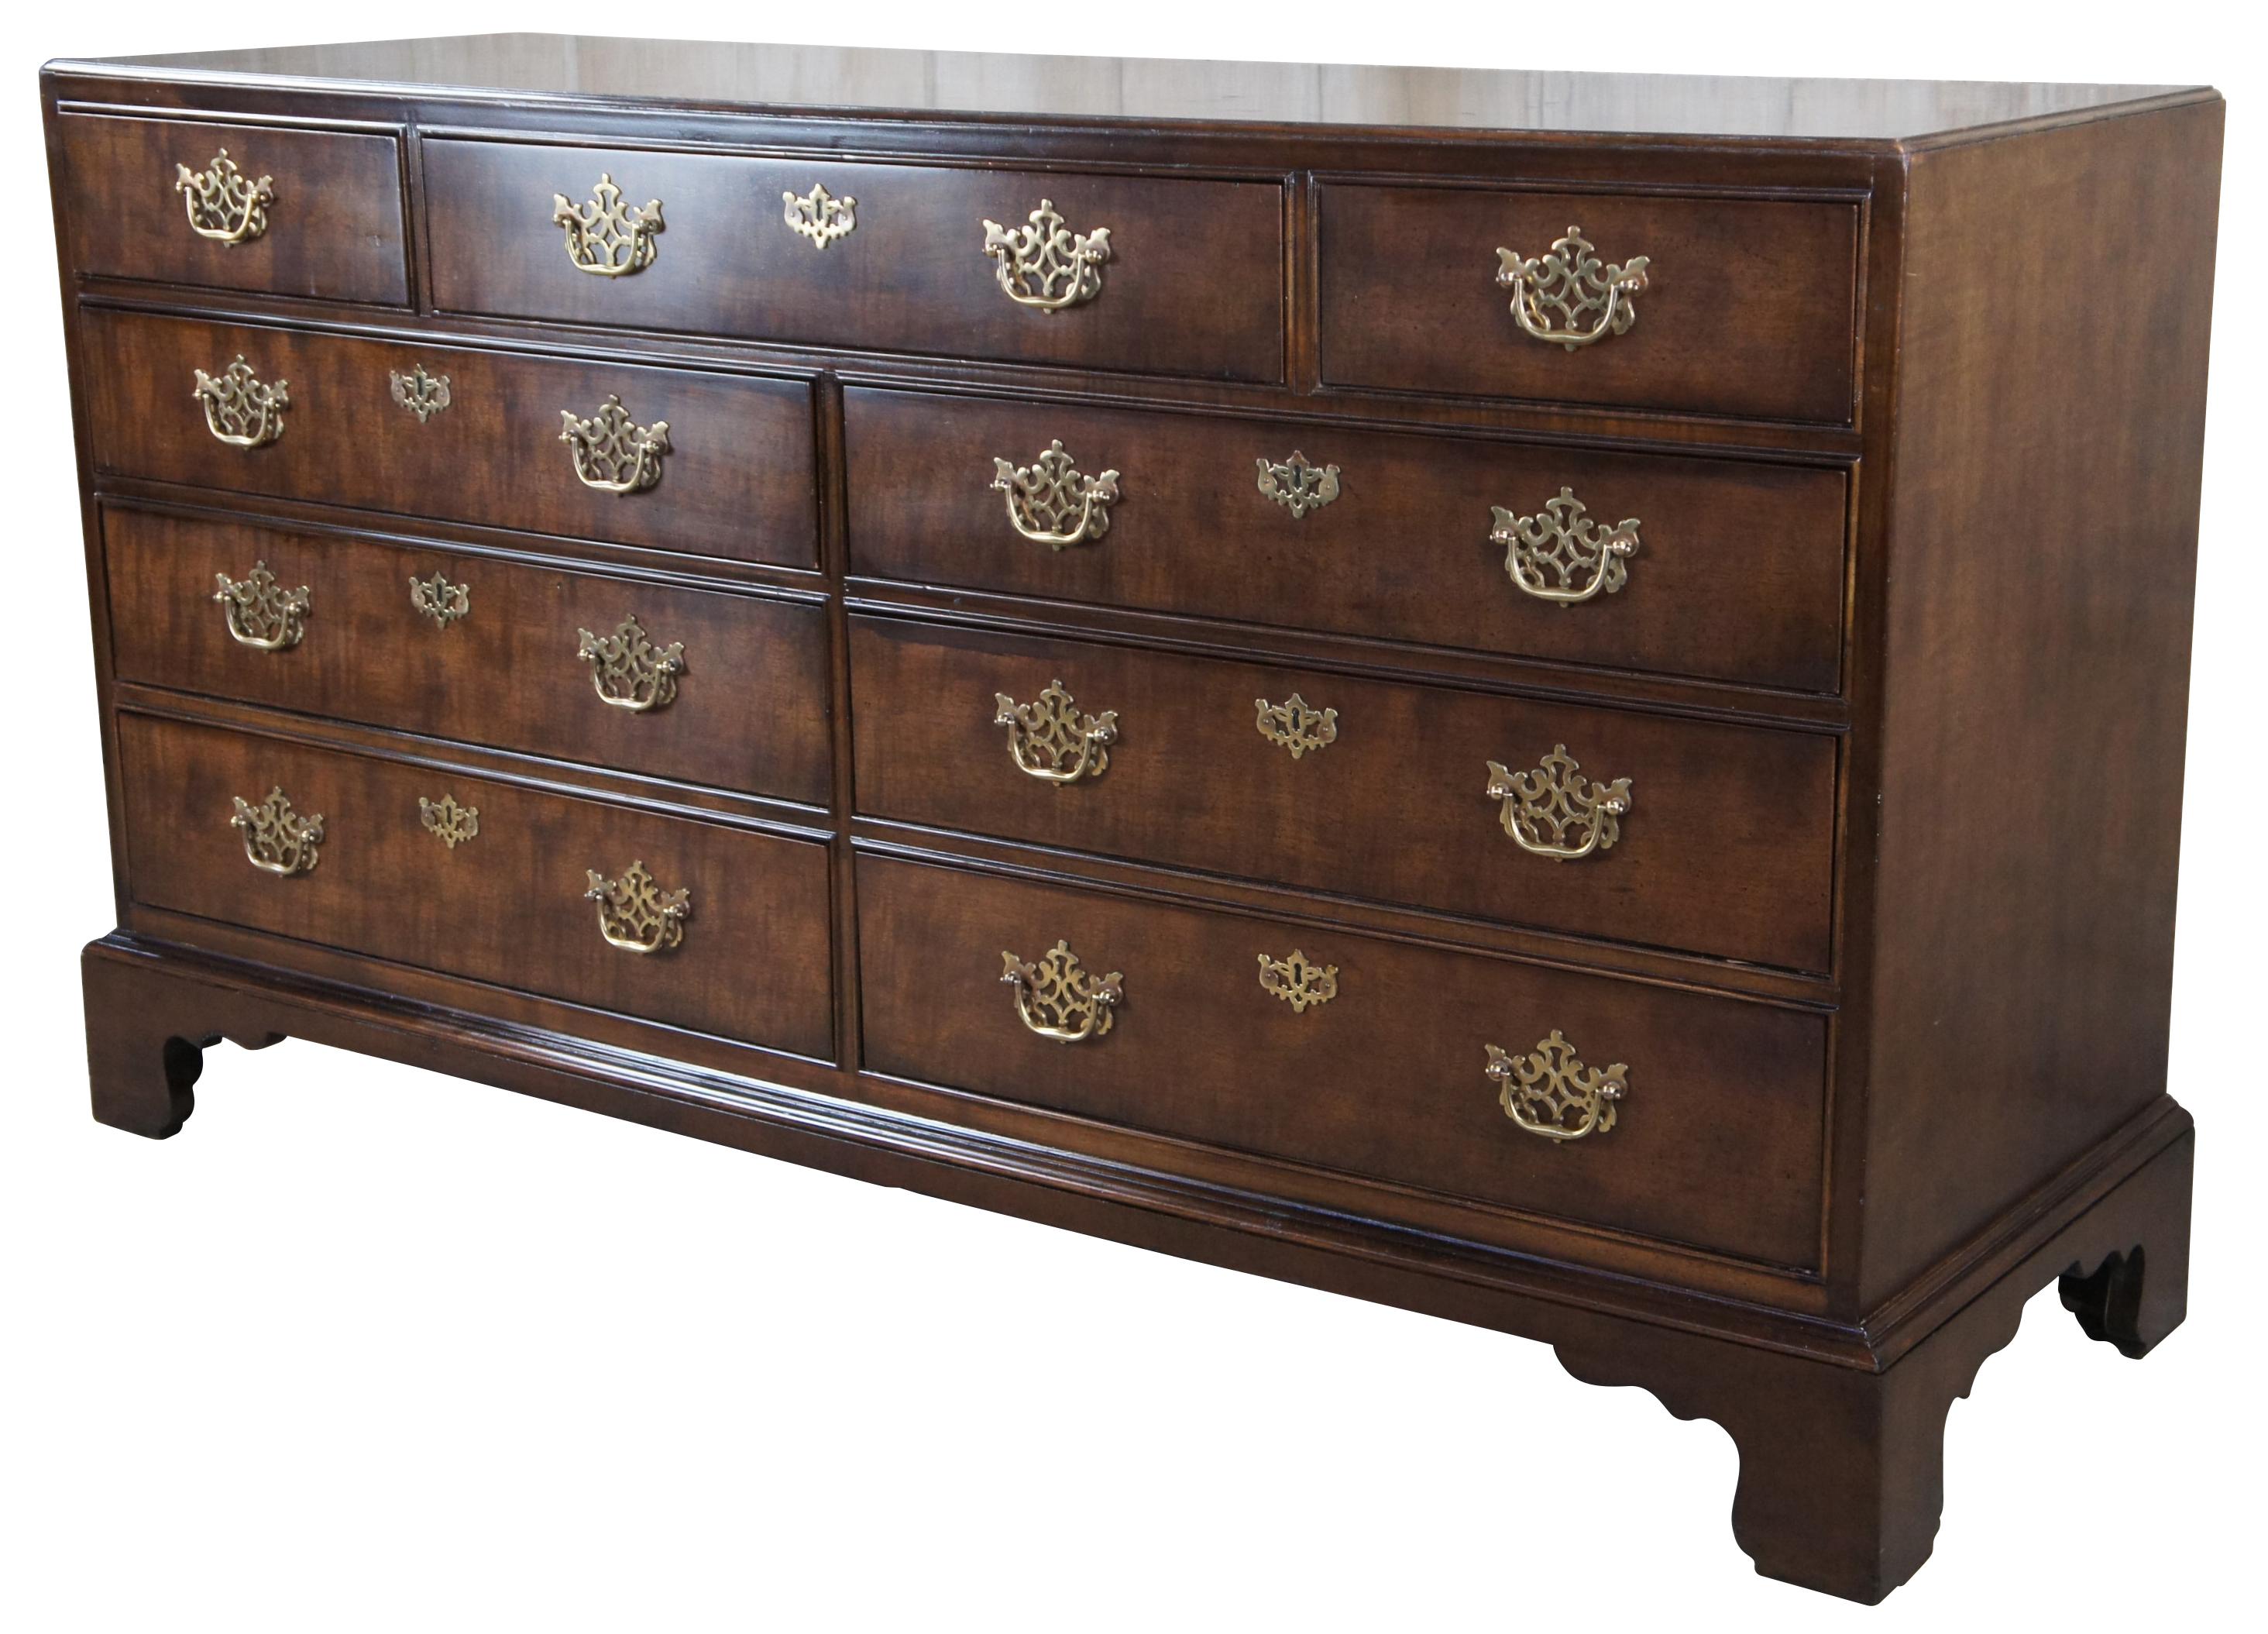 Vintage Henredon Chippendale and Georgian inspired double dresser 3400-01, circa 1984. Made from mahogany with 9 dovetailed drawers, pierced batwing bale hardware and faux escutcheon. The case is raised over bracket feet.